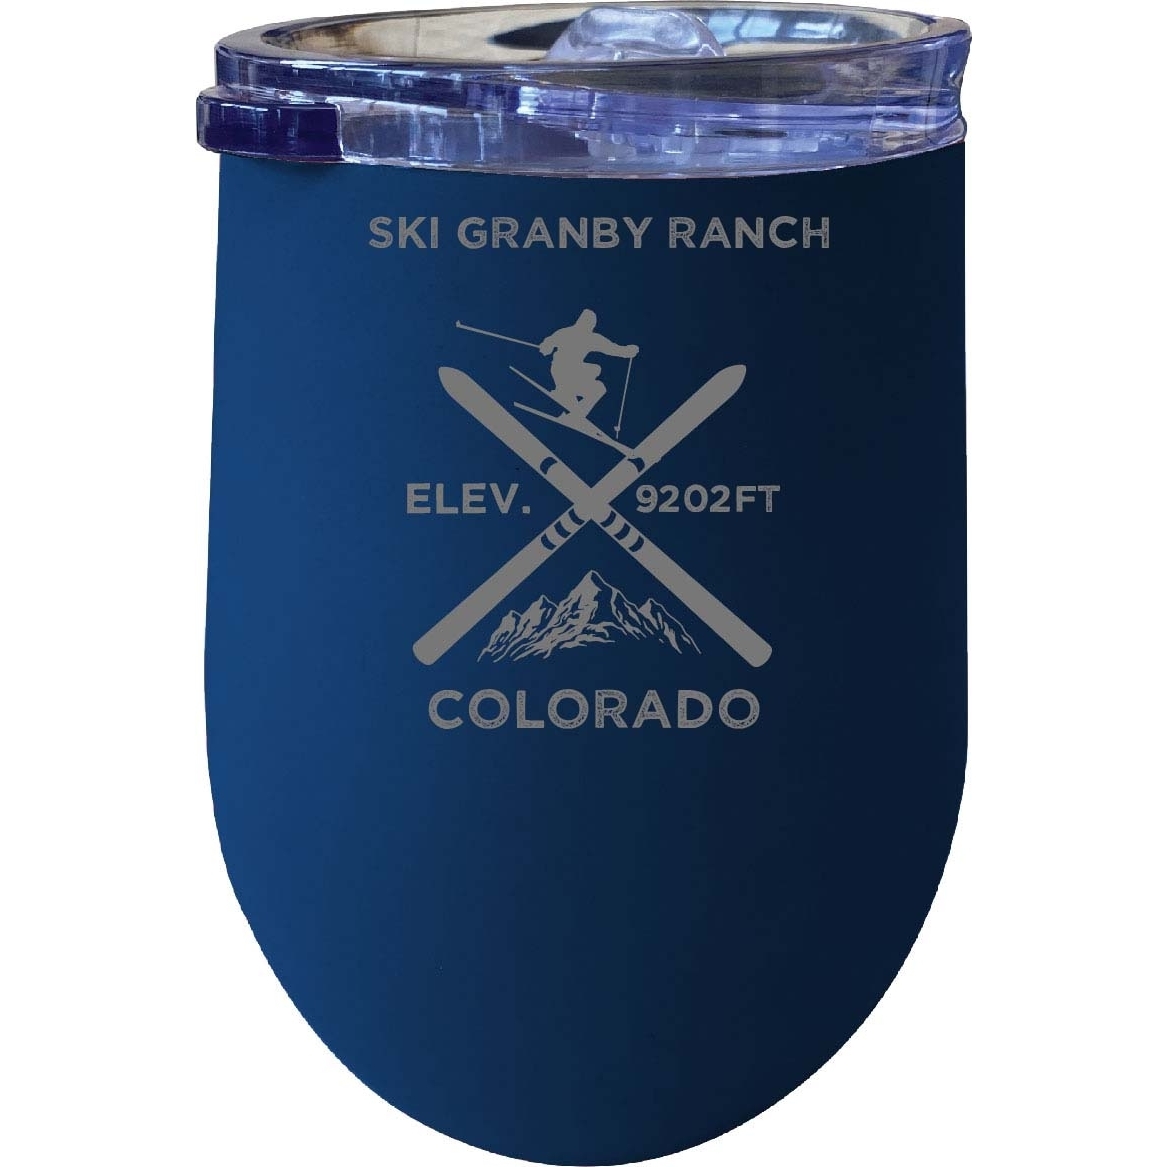 Ski Granby Ranch Colorado Ski Souvenir 12 Oz Laser Etched Insulated Wine Stainless Steel Tumbler - Coral